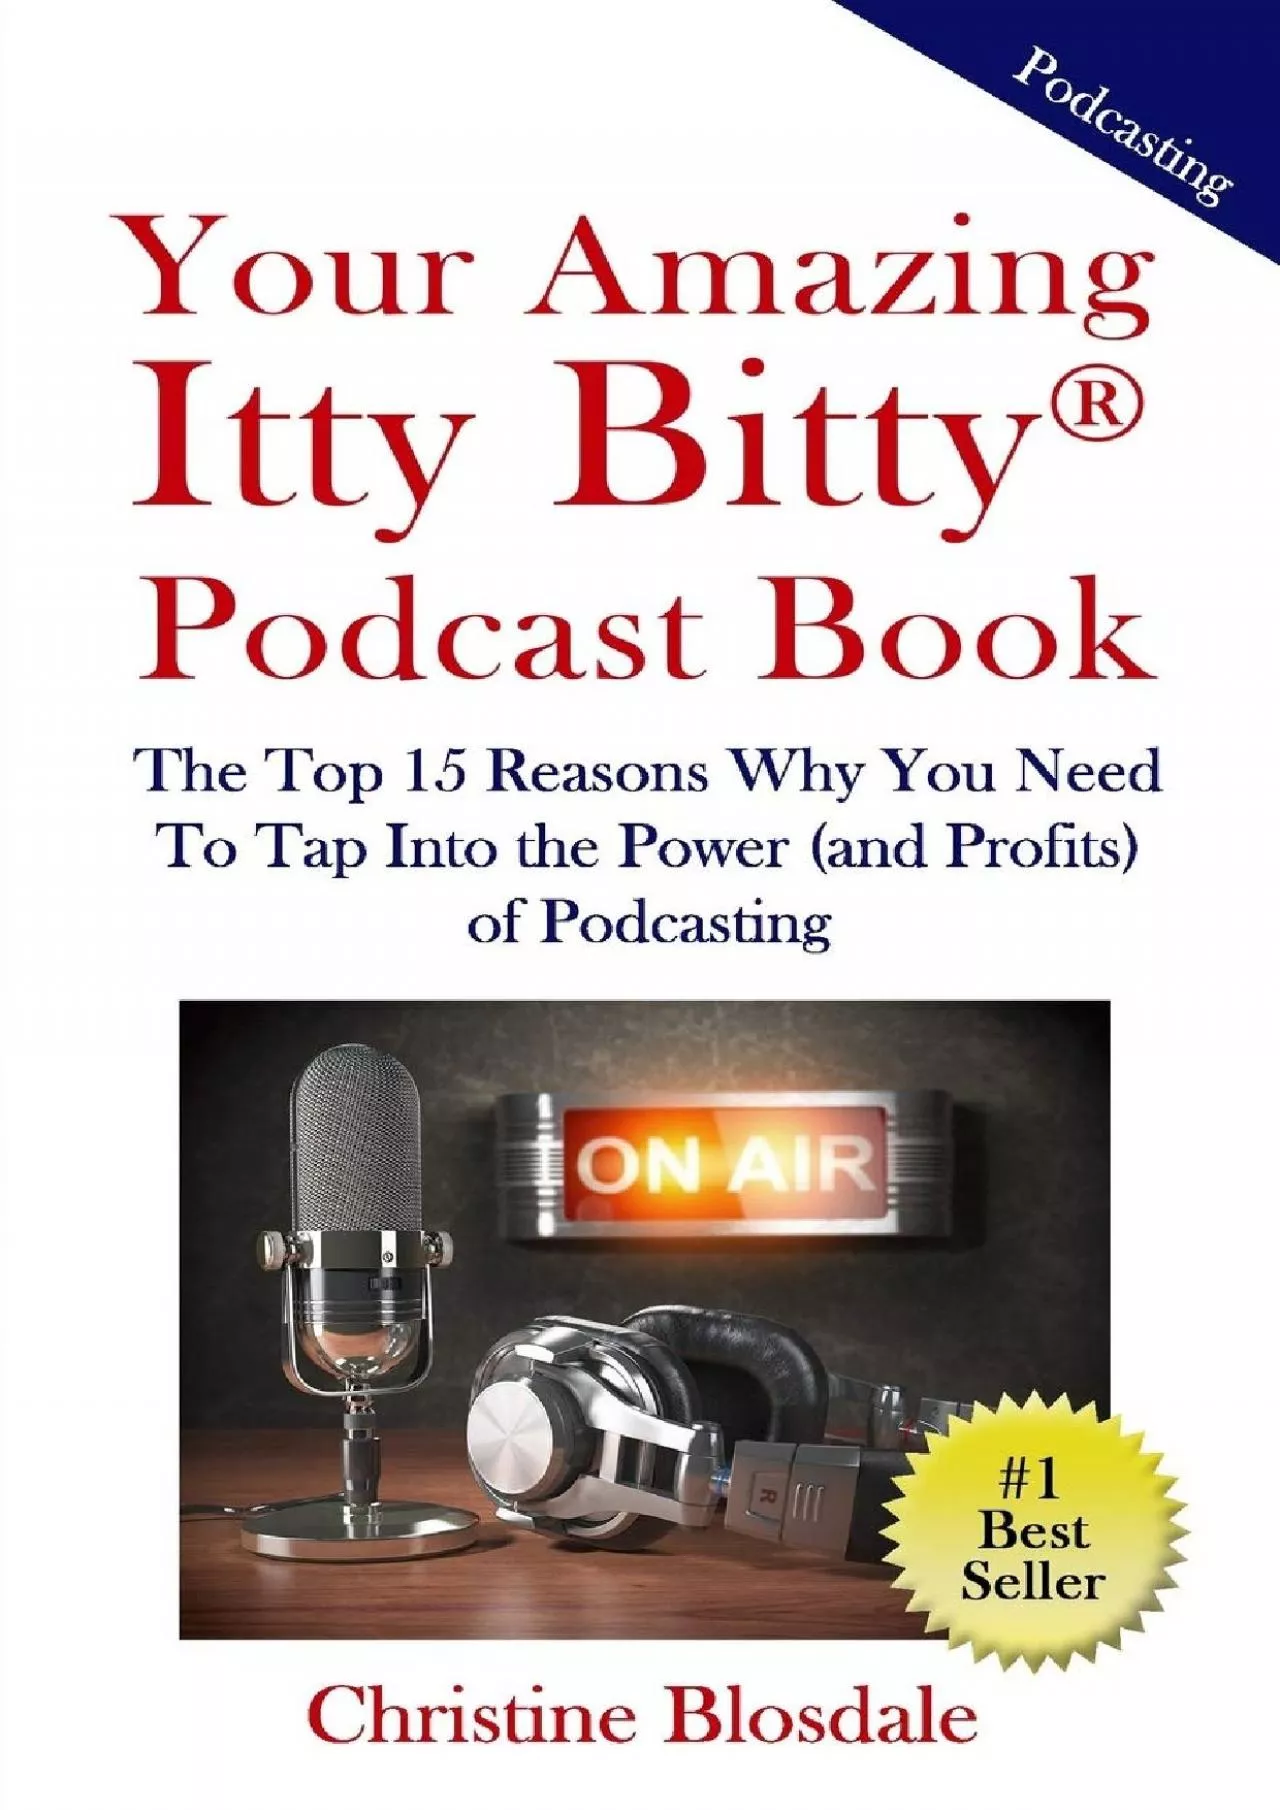 Your Amazing Itty Bitty® Podcast Book: The Top 15 Reasons Why You Need To Tap Into the